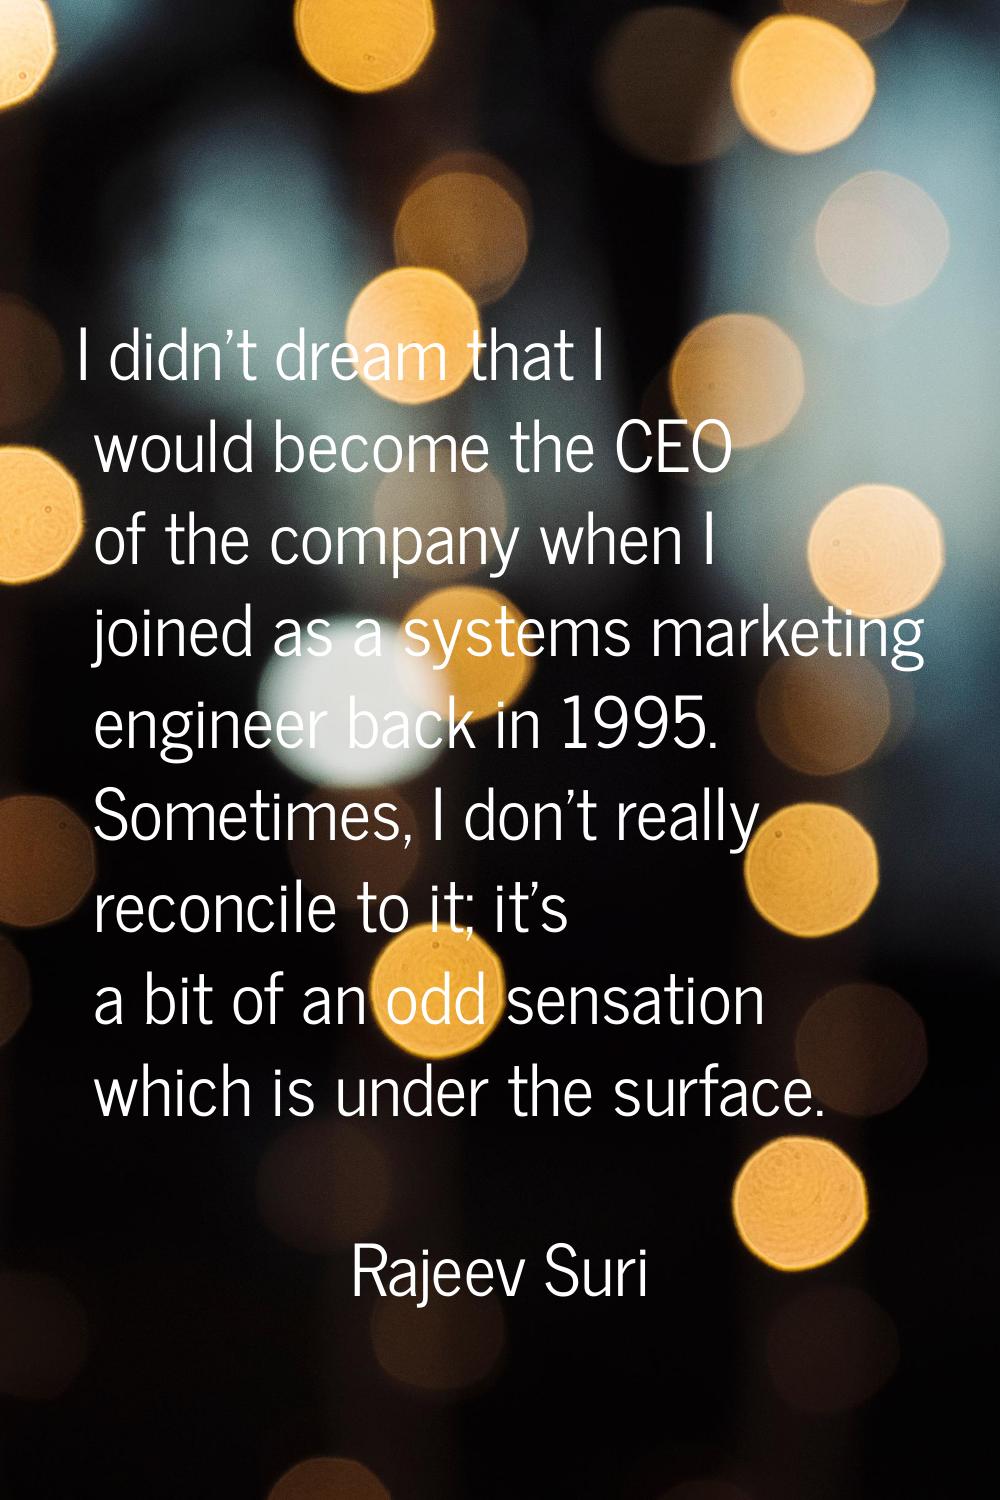 I didn't dream that I would become the CEO of the company when I joined as a systems marketing engi